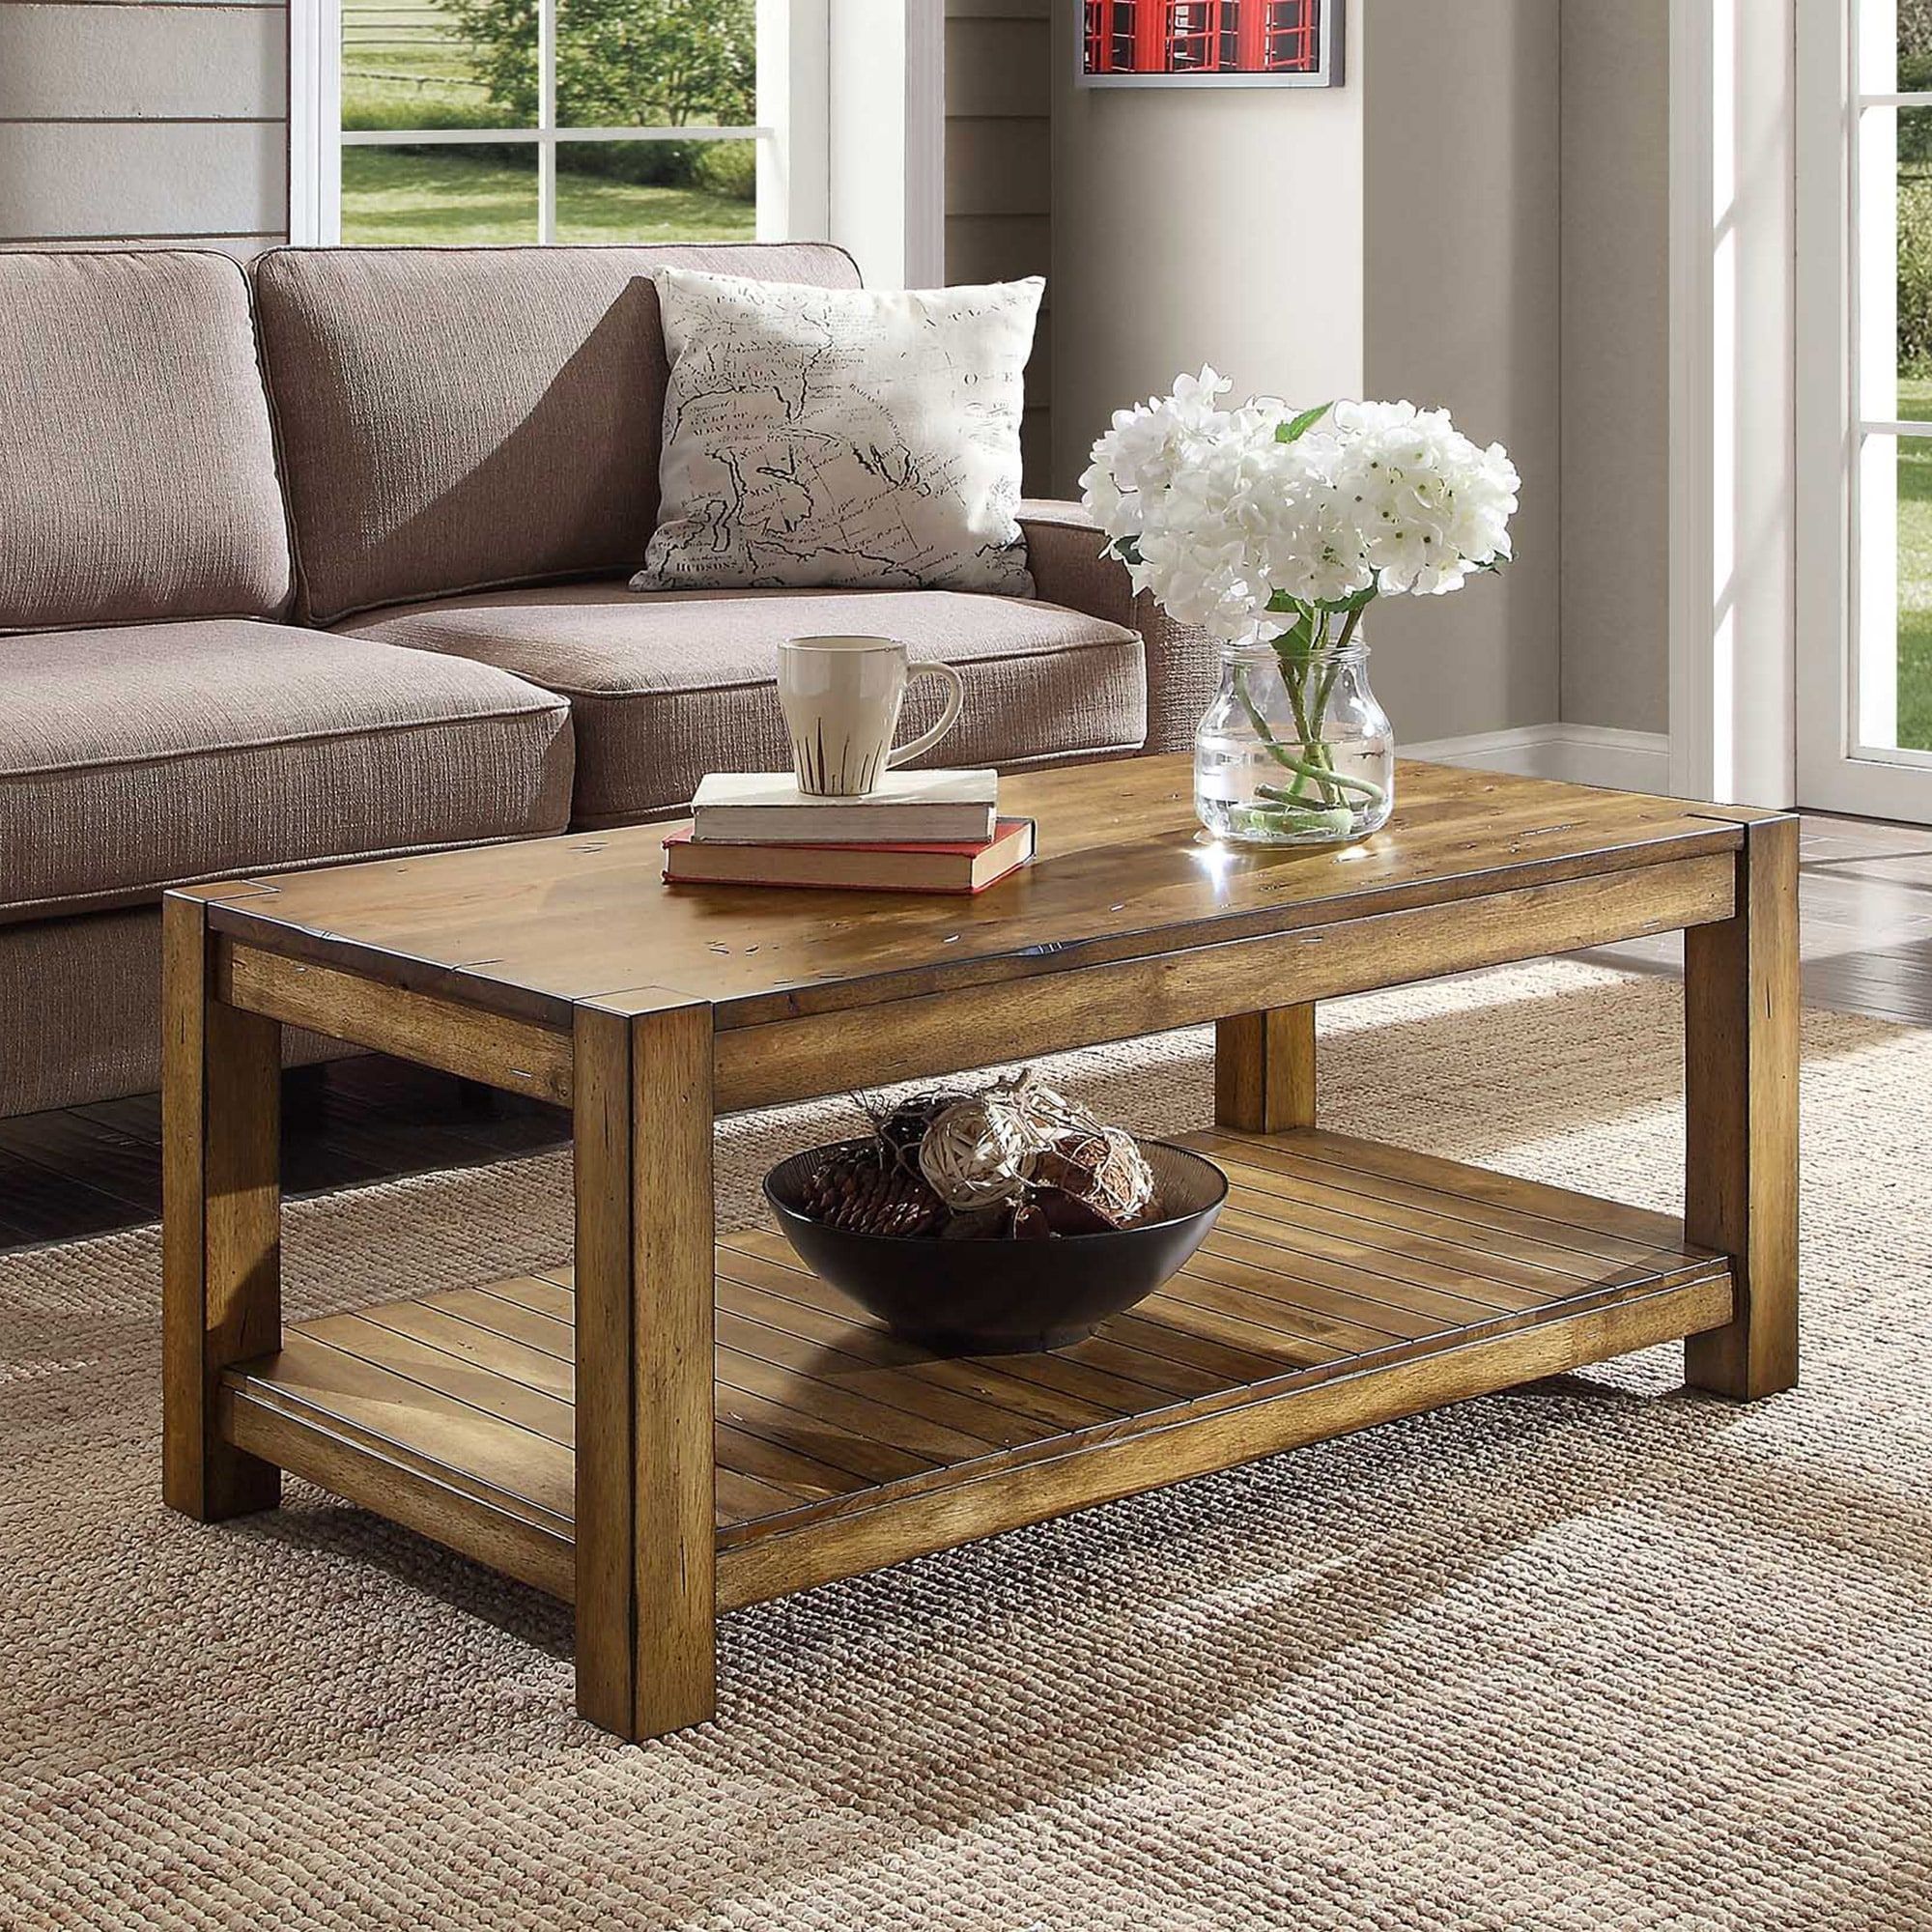 Bryant Coffee Table | Whalen Furniture With Regard To Brown Rustic Coffee Tables (View 9 of 15)